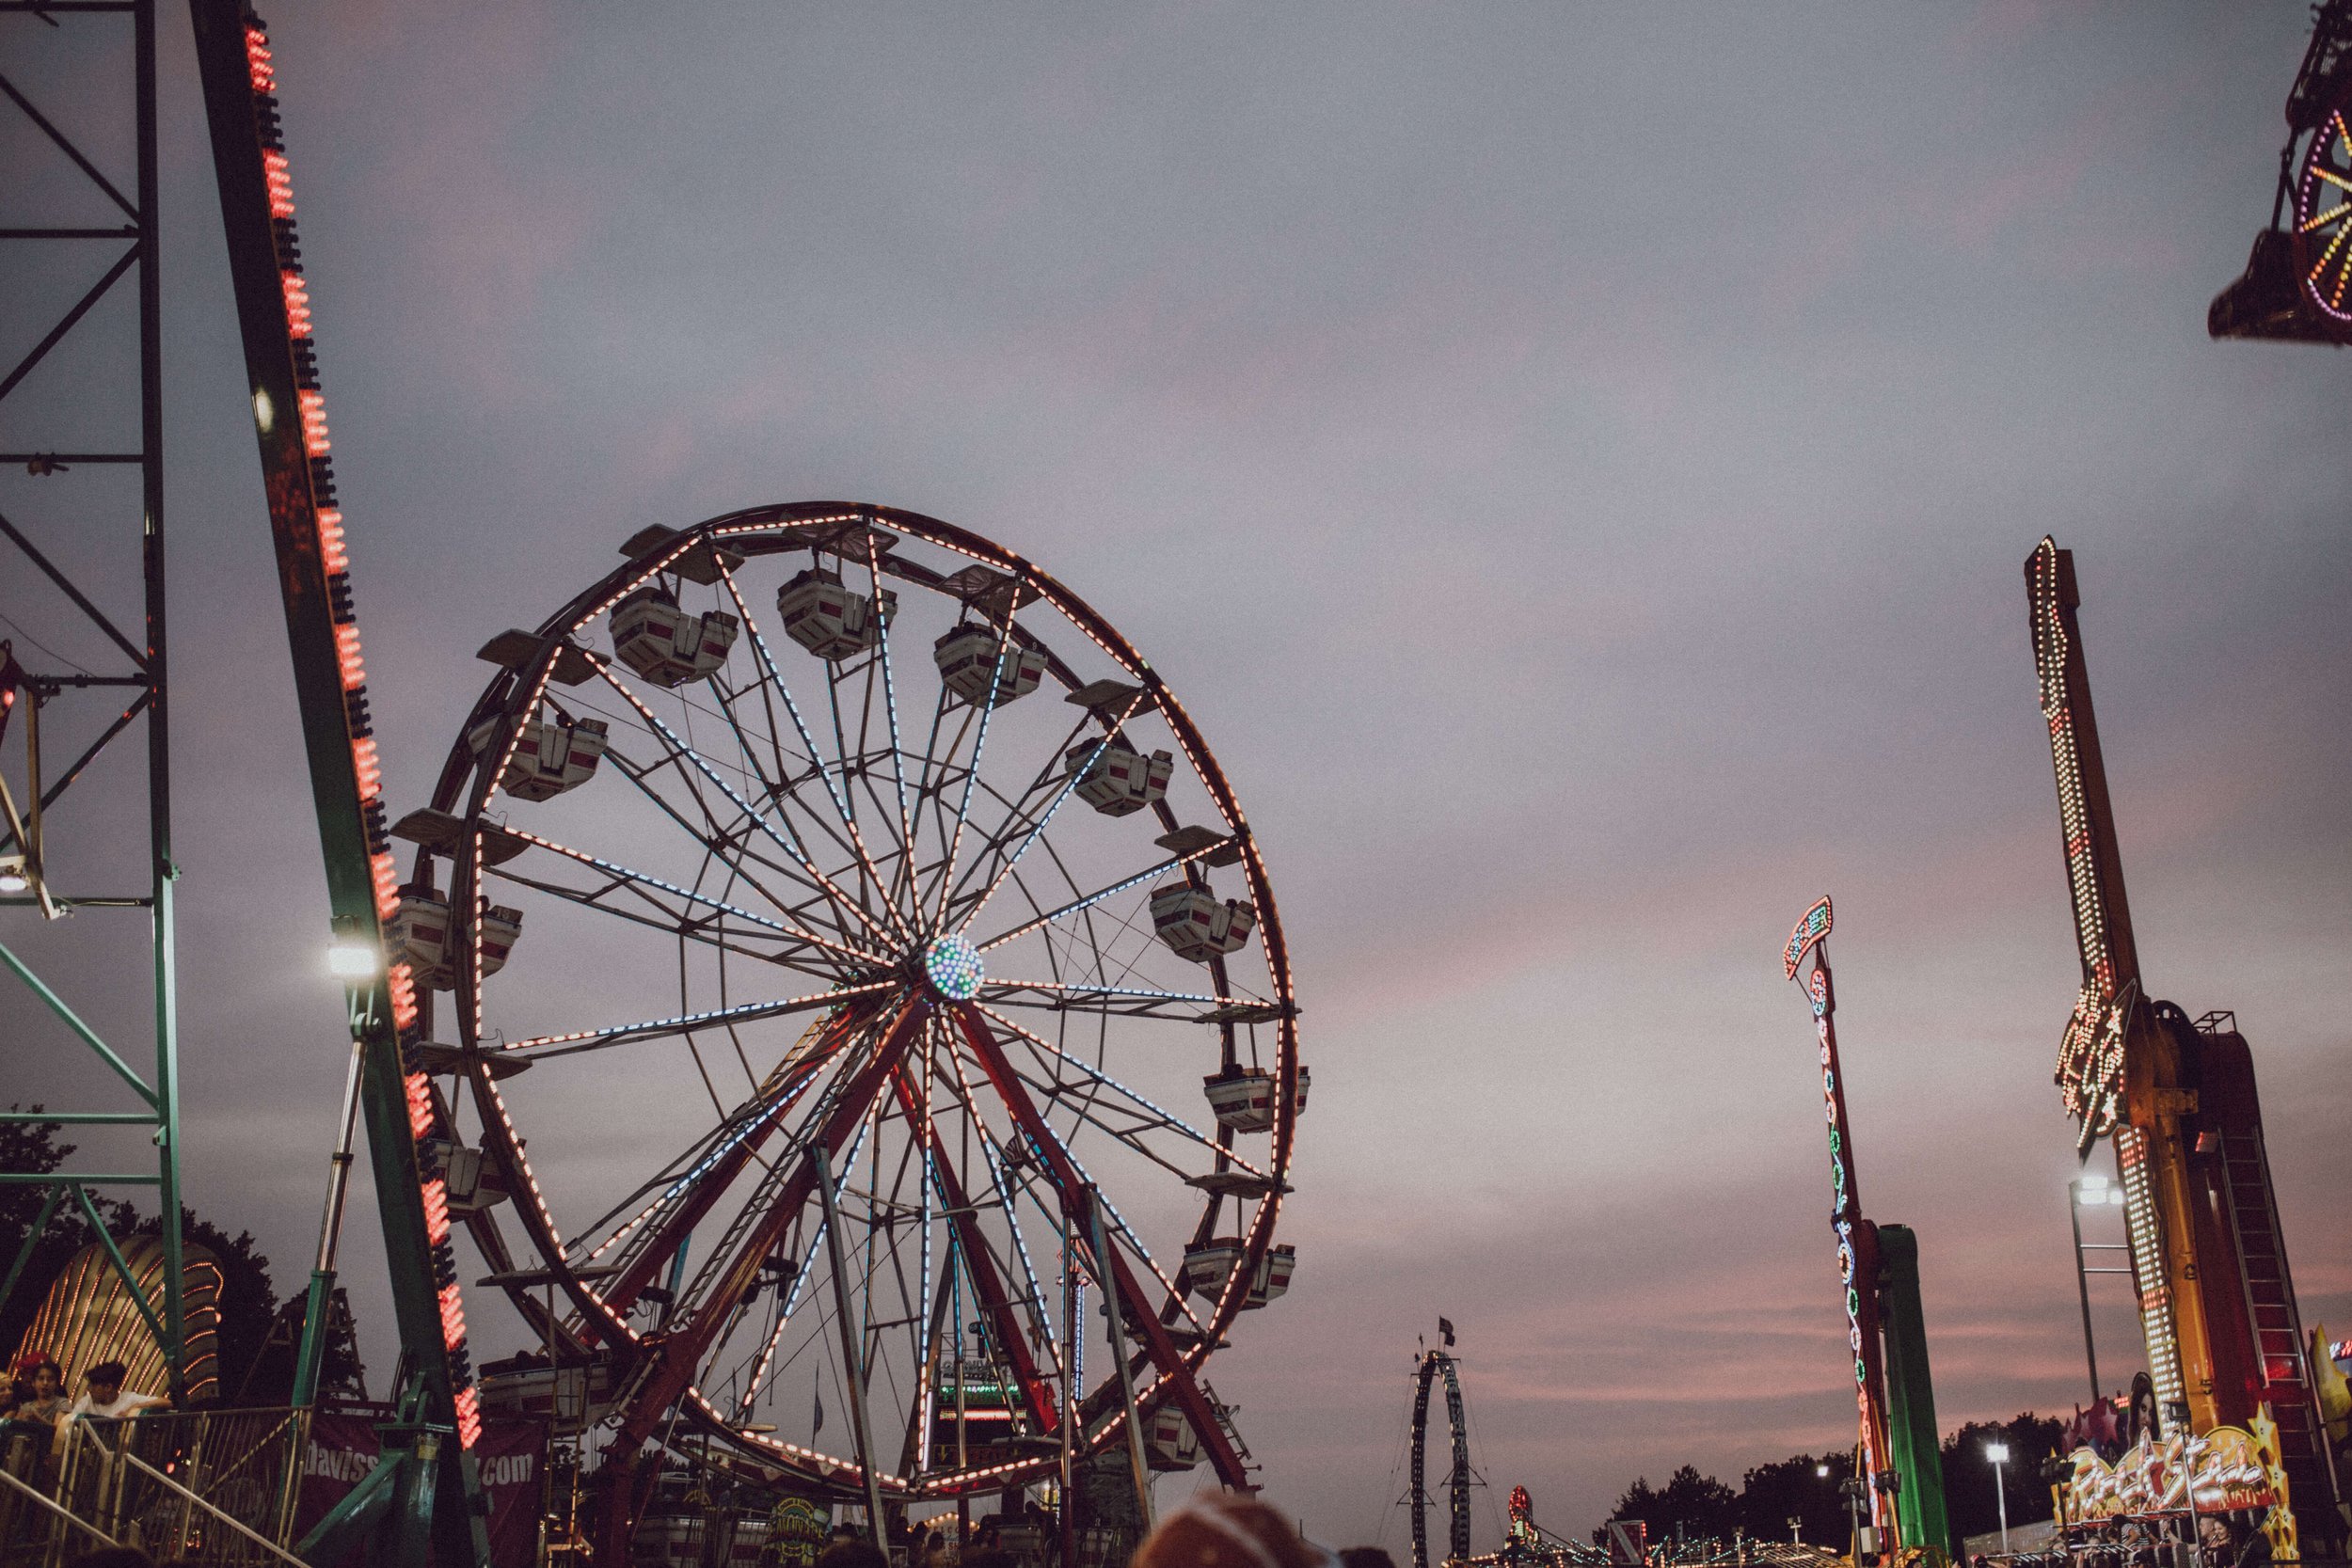 Benton-Franklin County Fair &amp; Rodeo | Summer Sunsets | 400 Lux Photography